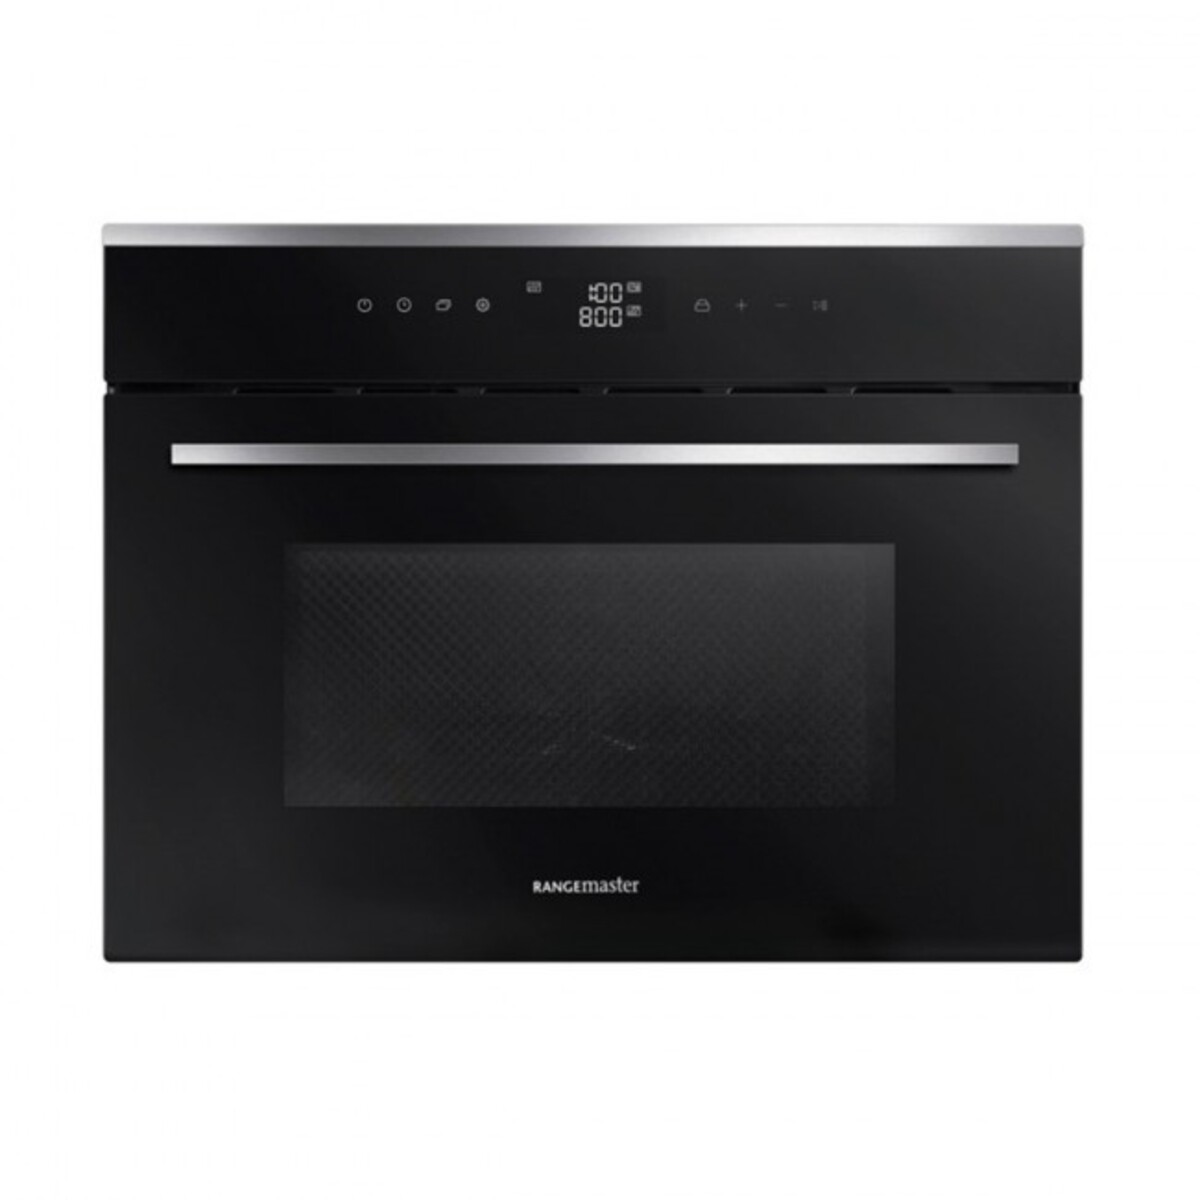 Rangemaster RMB45MCBL/SS (11230) 45cm Built-in Microwave Combi Oven, Black/Stainless